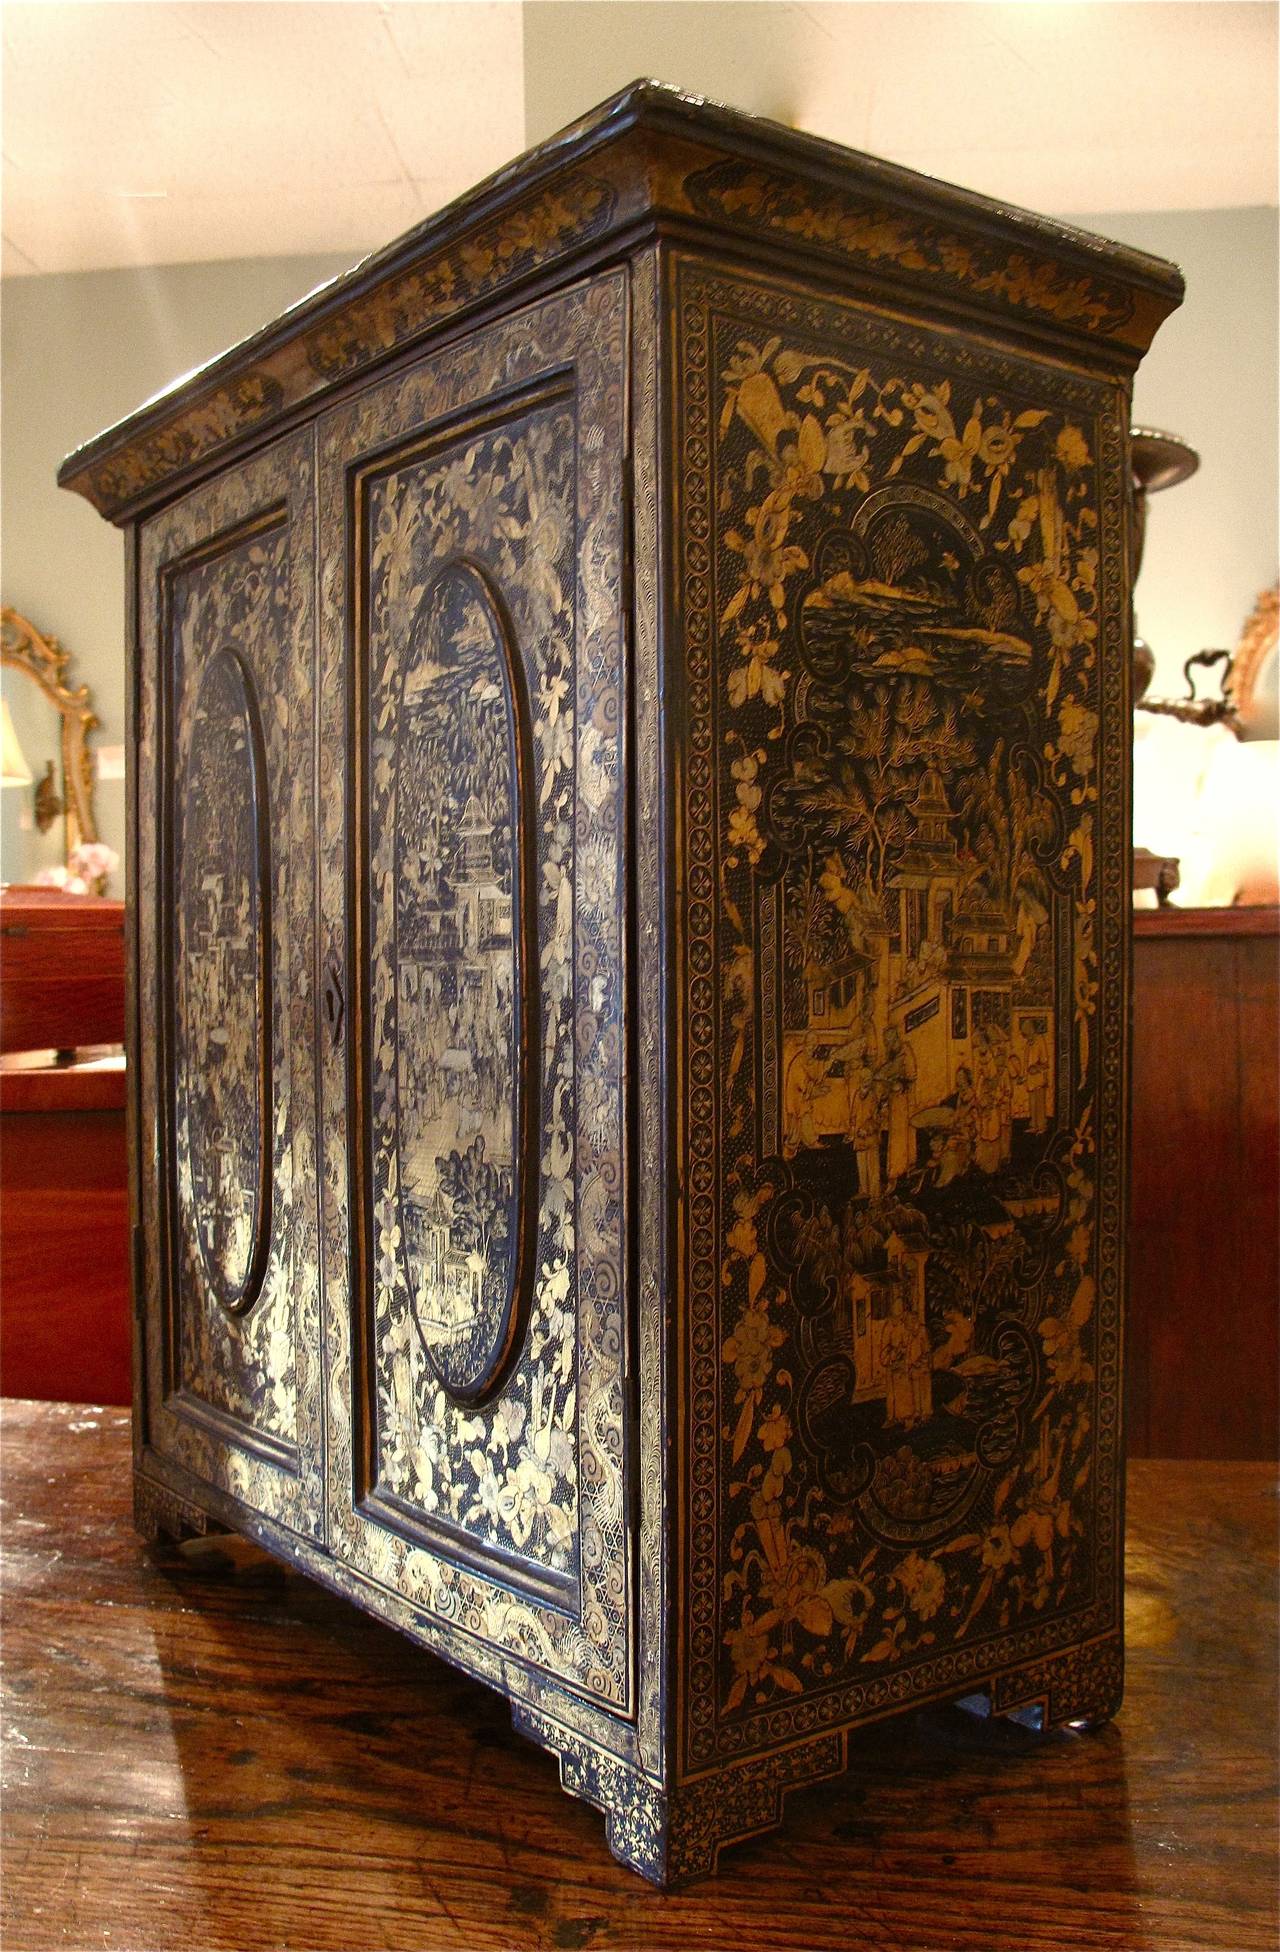 A Chinese export collector’s cabinet dating to the second half of the 19th century, with 5 drawers concealed within exquisitely decorated cabinet doors. Each drawer has a pair of turned ivory pulls.